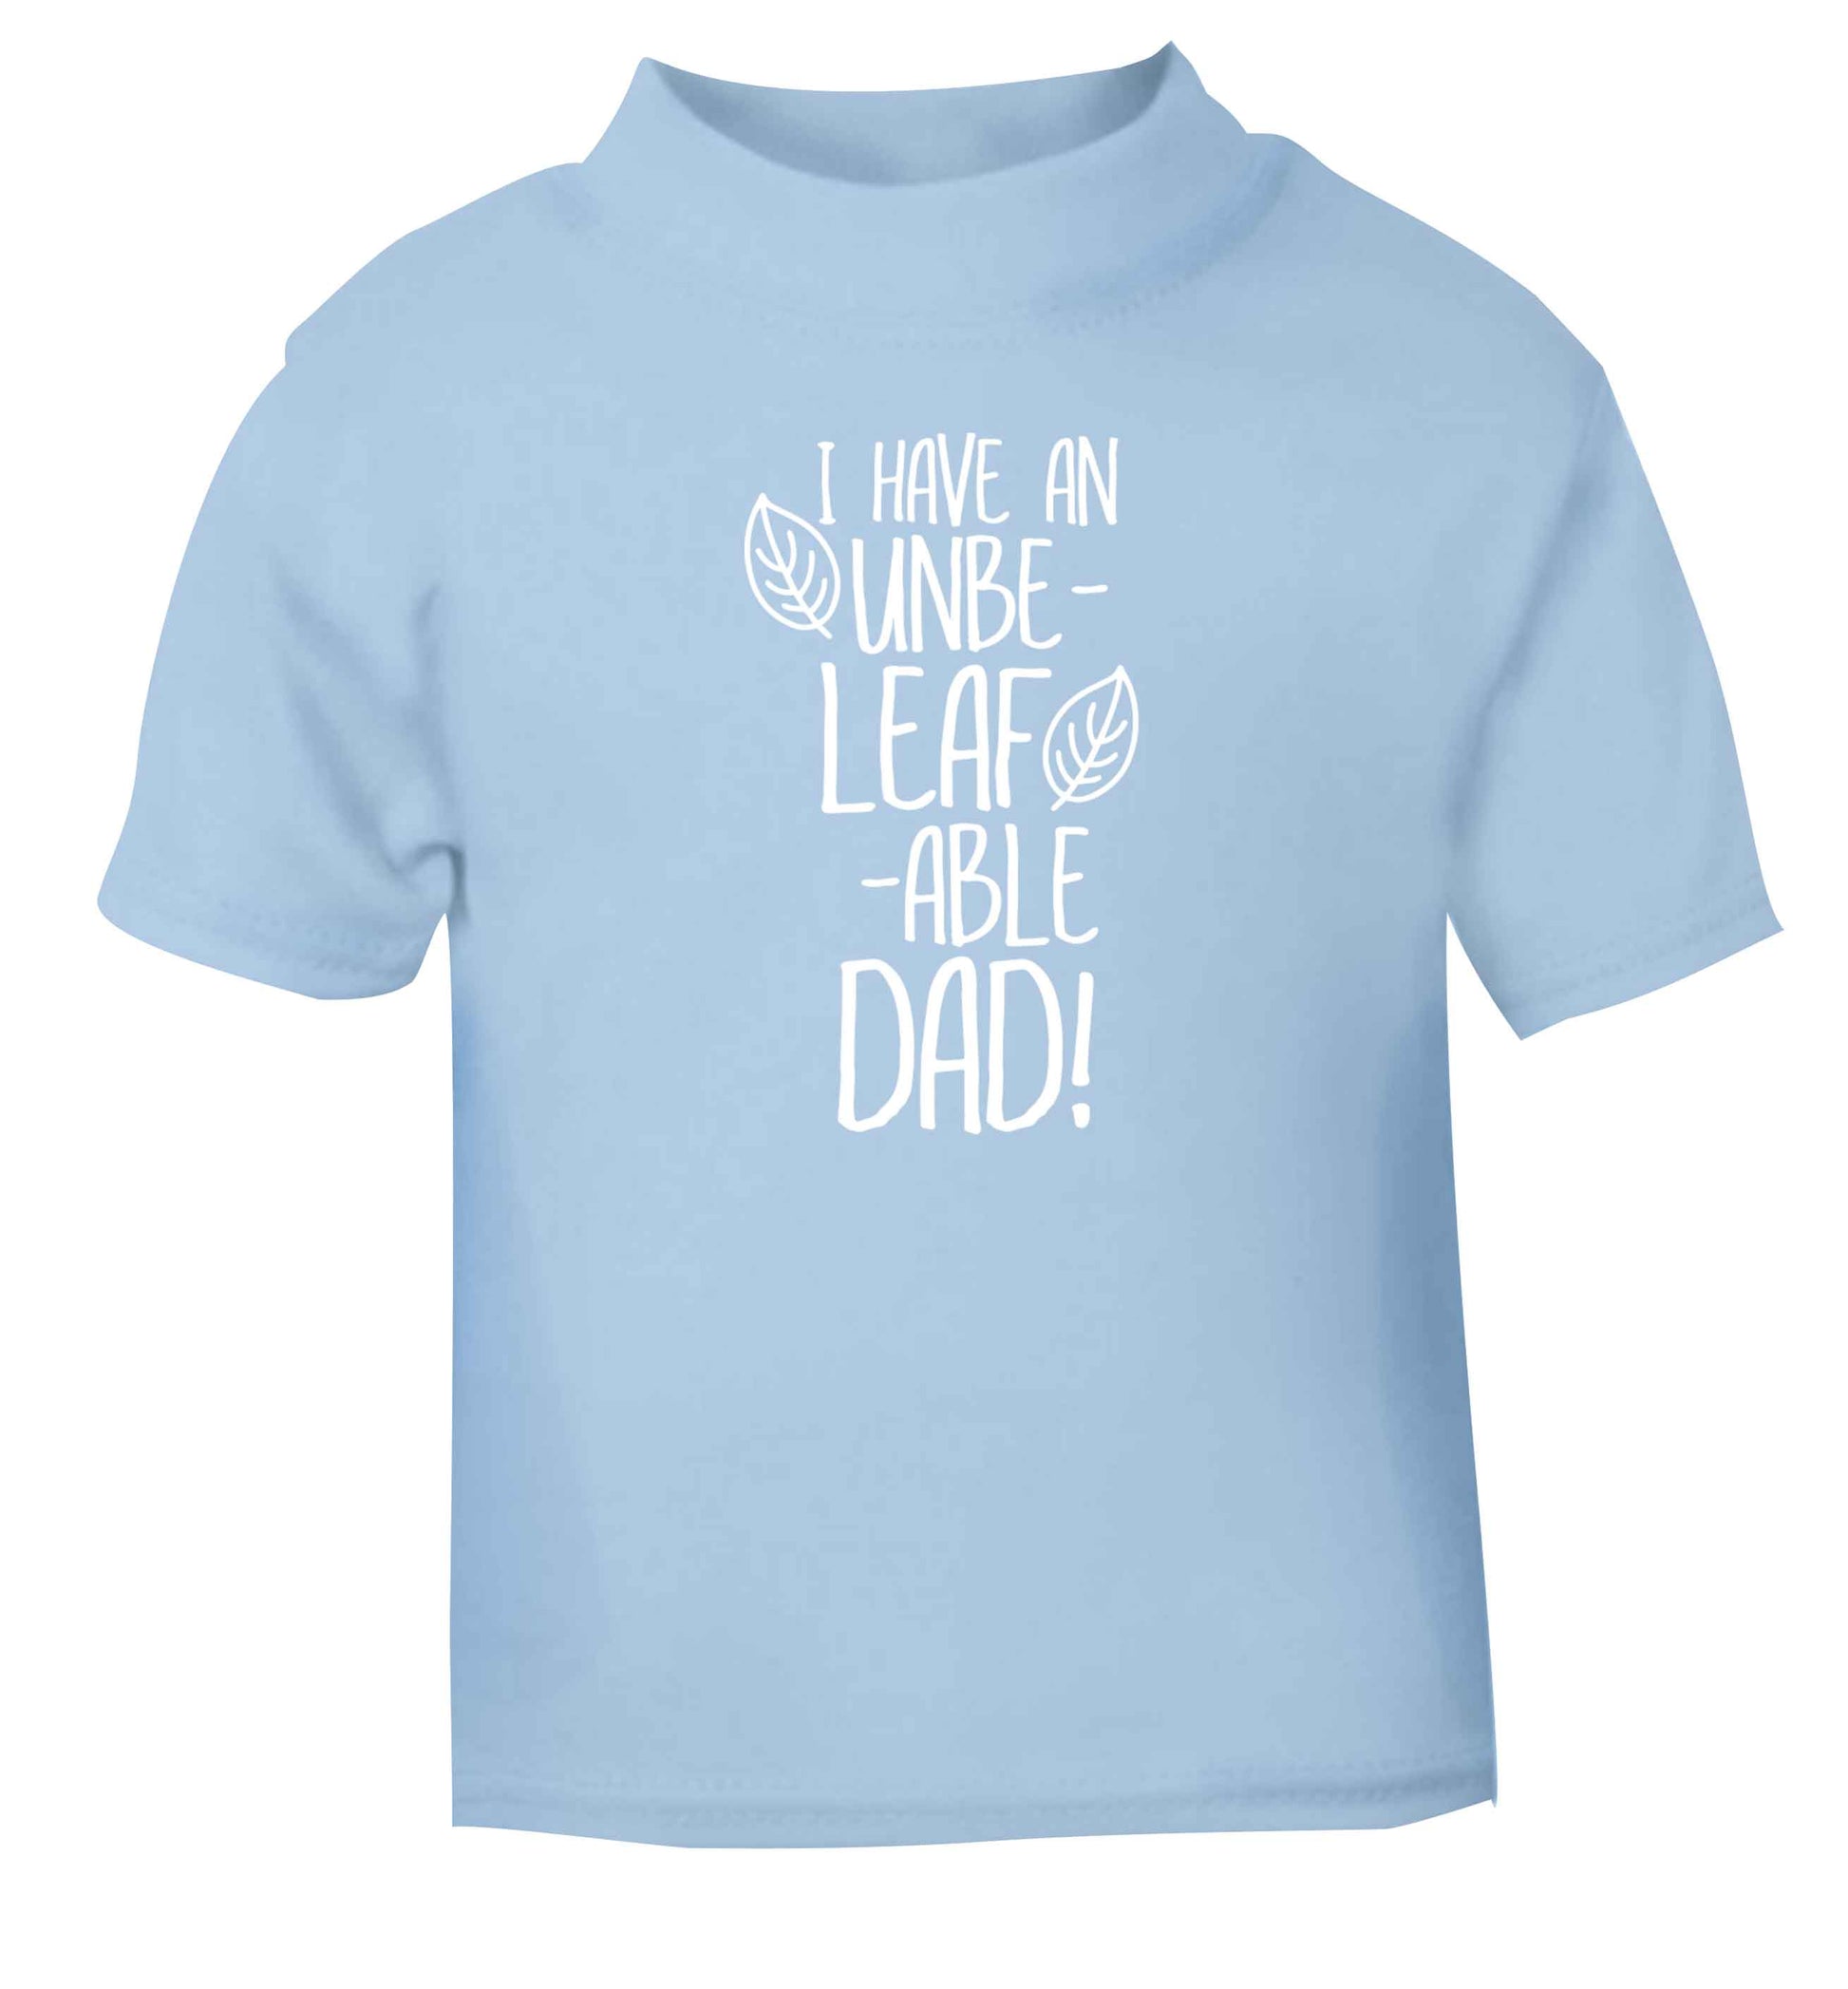 I have an unbe-leaf-able dad light blue Baby Toddler Tshirt 2 Years